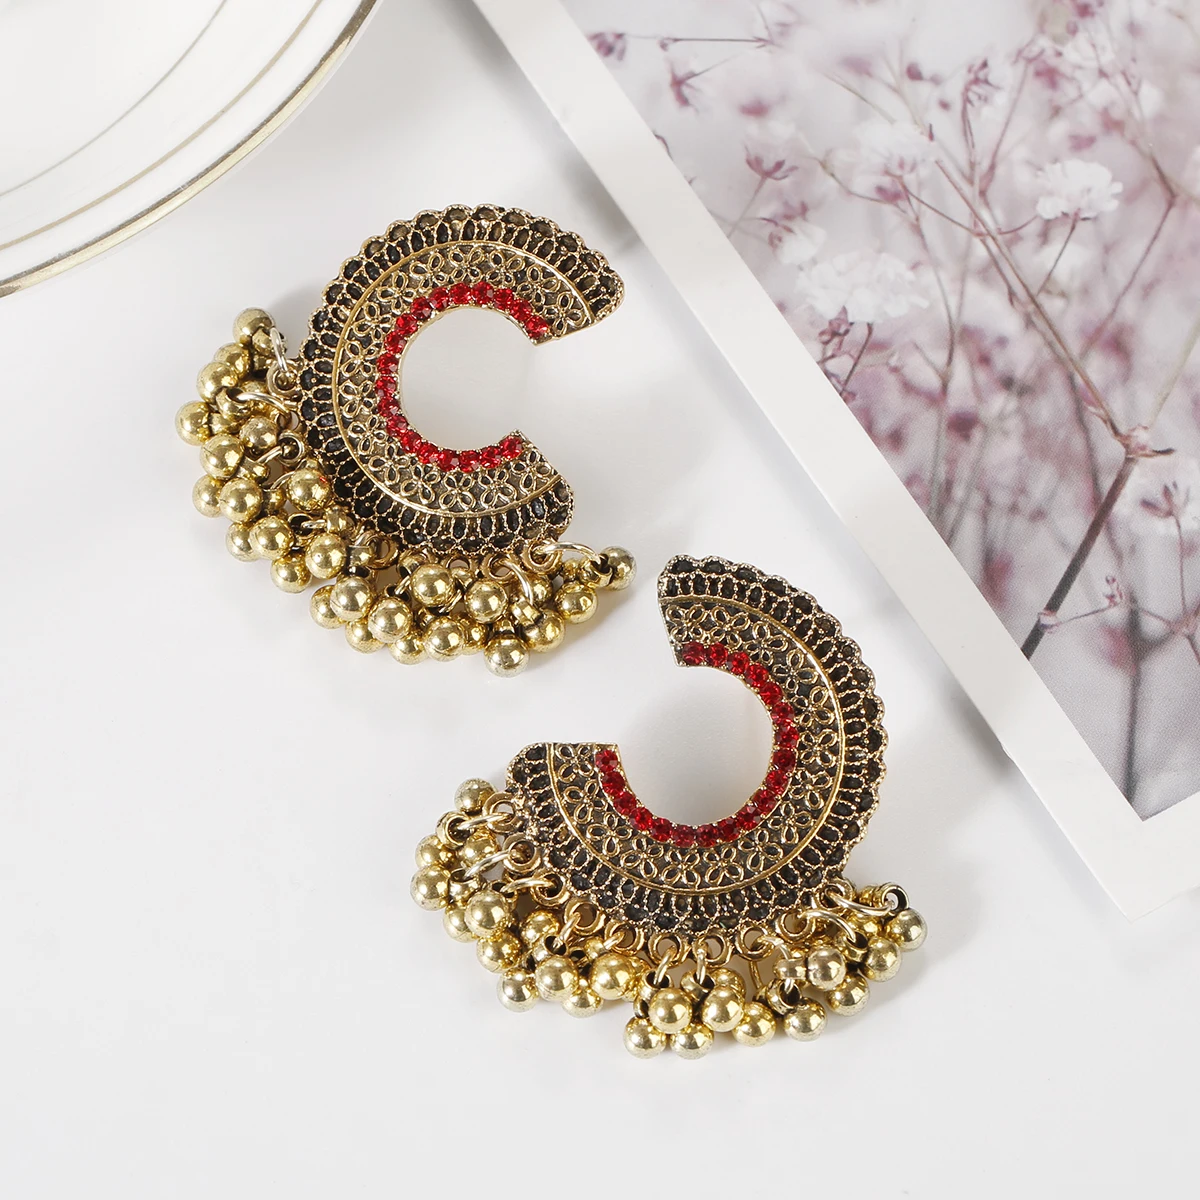 New Ethnic Women's Red Zircon Indian Jhumka Earrings Pendientes Fashion Jewelry Gold Color Alloy Semicircle Earrings